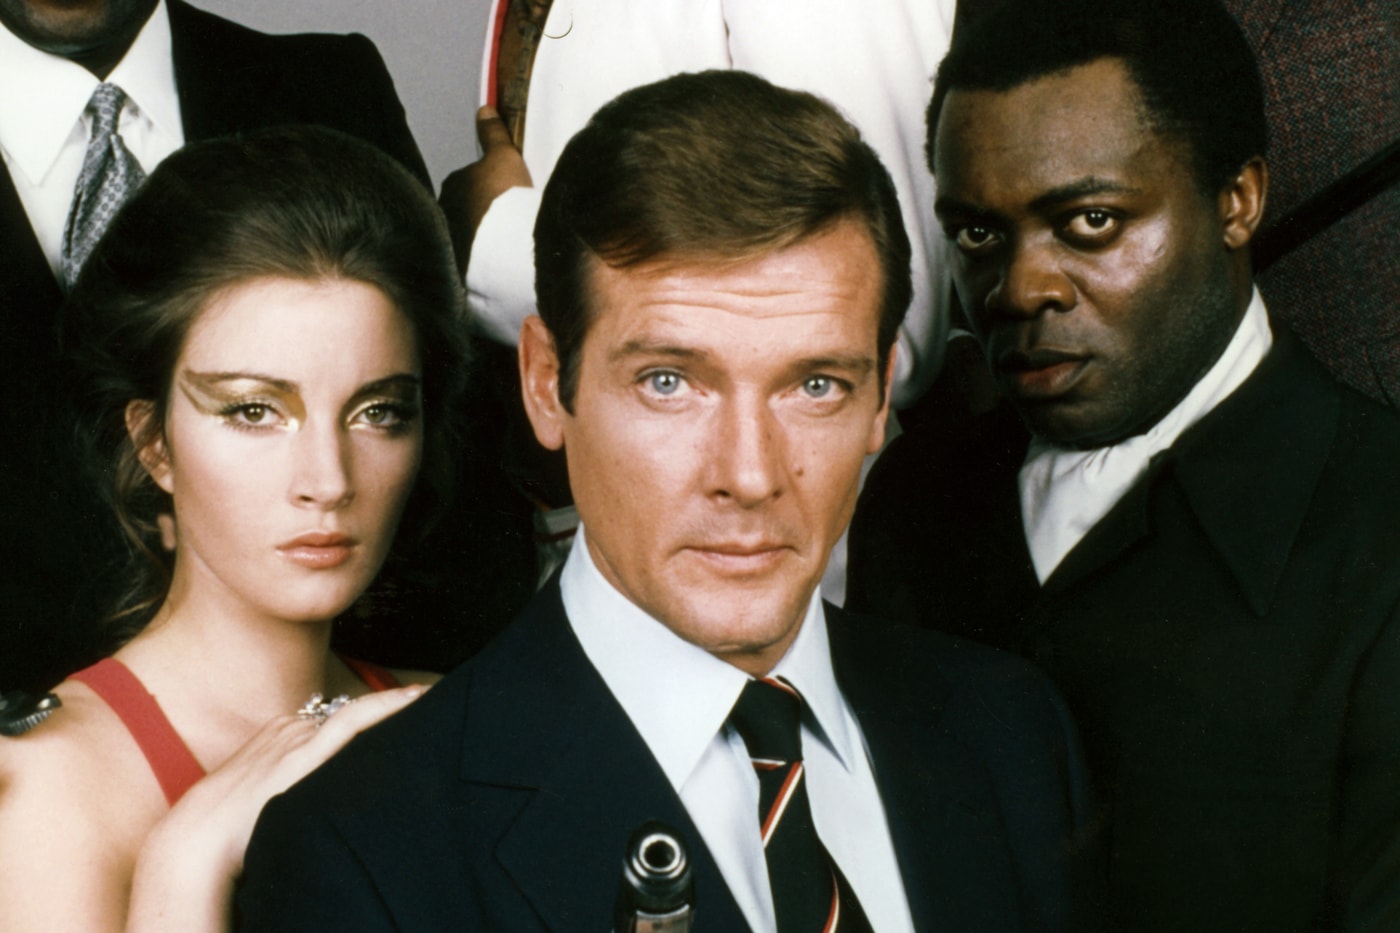 james Bond Books rewritten remove Racist offensive References 